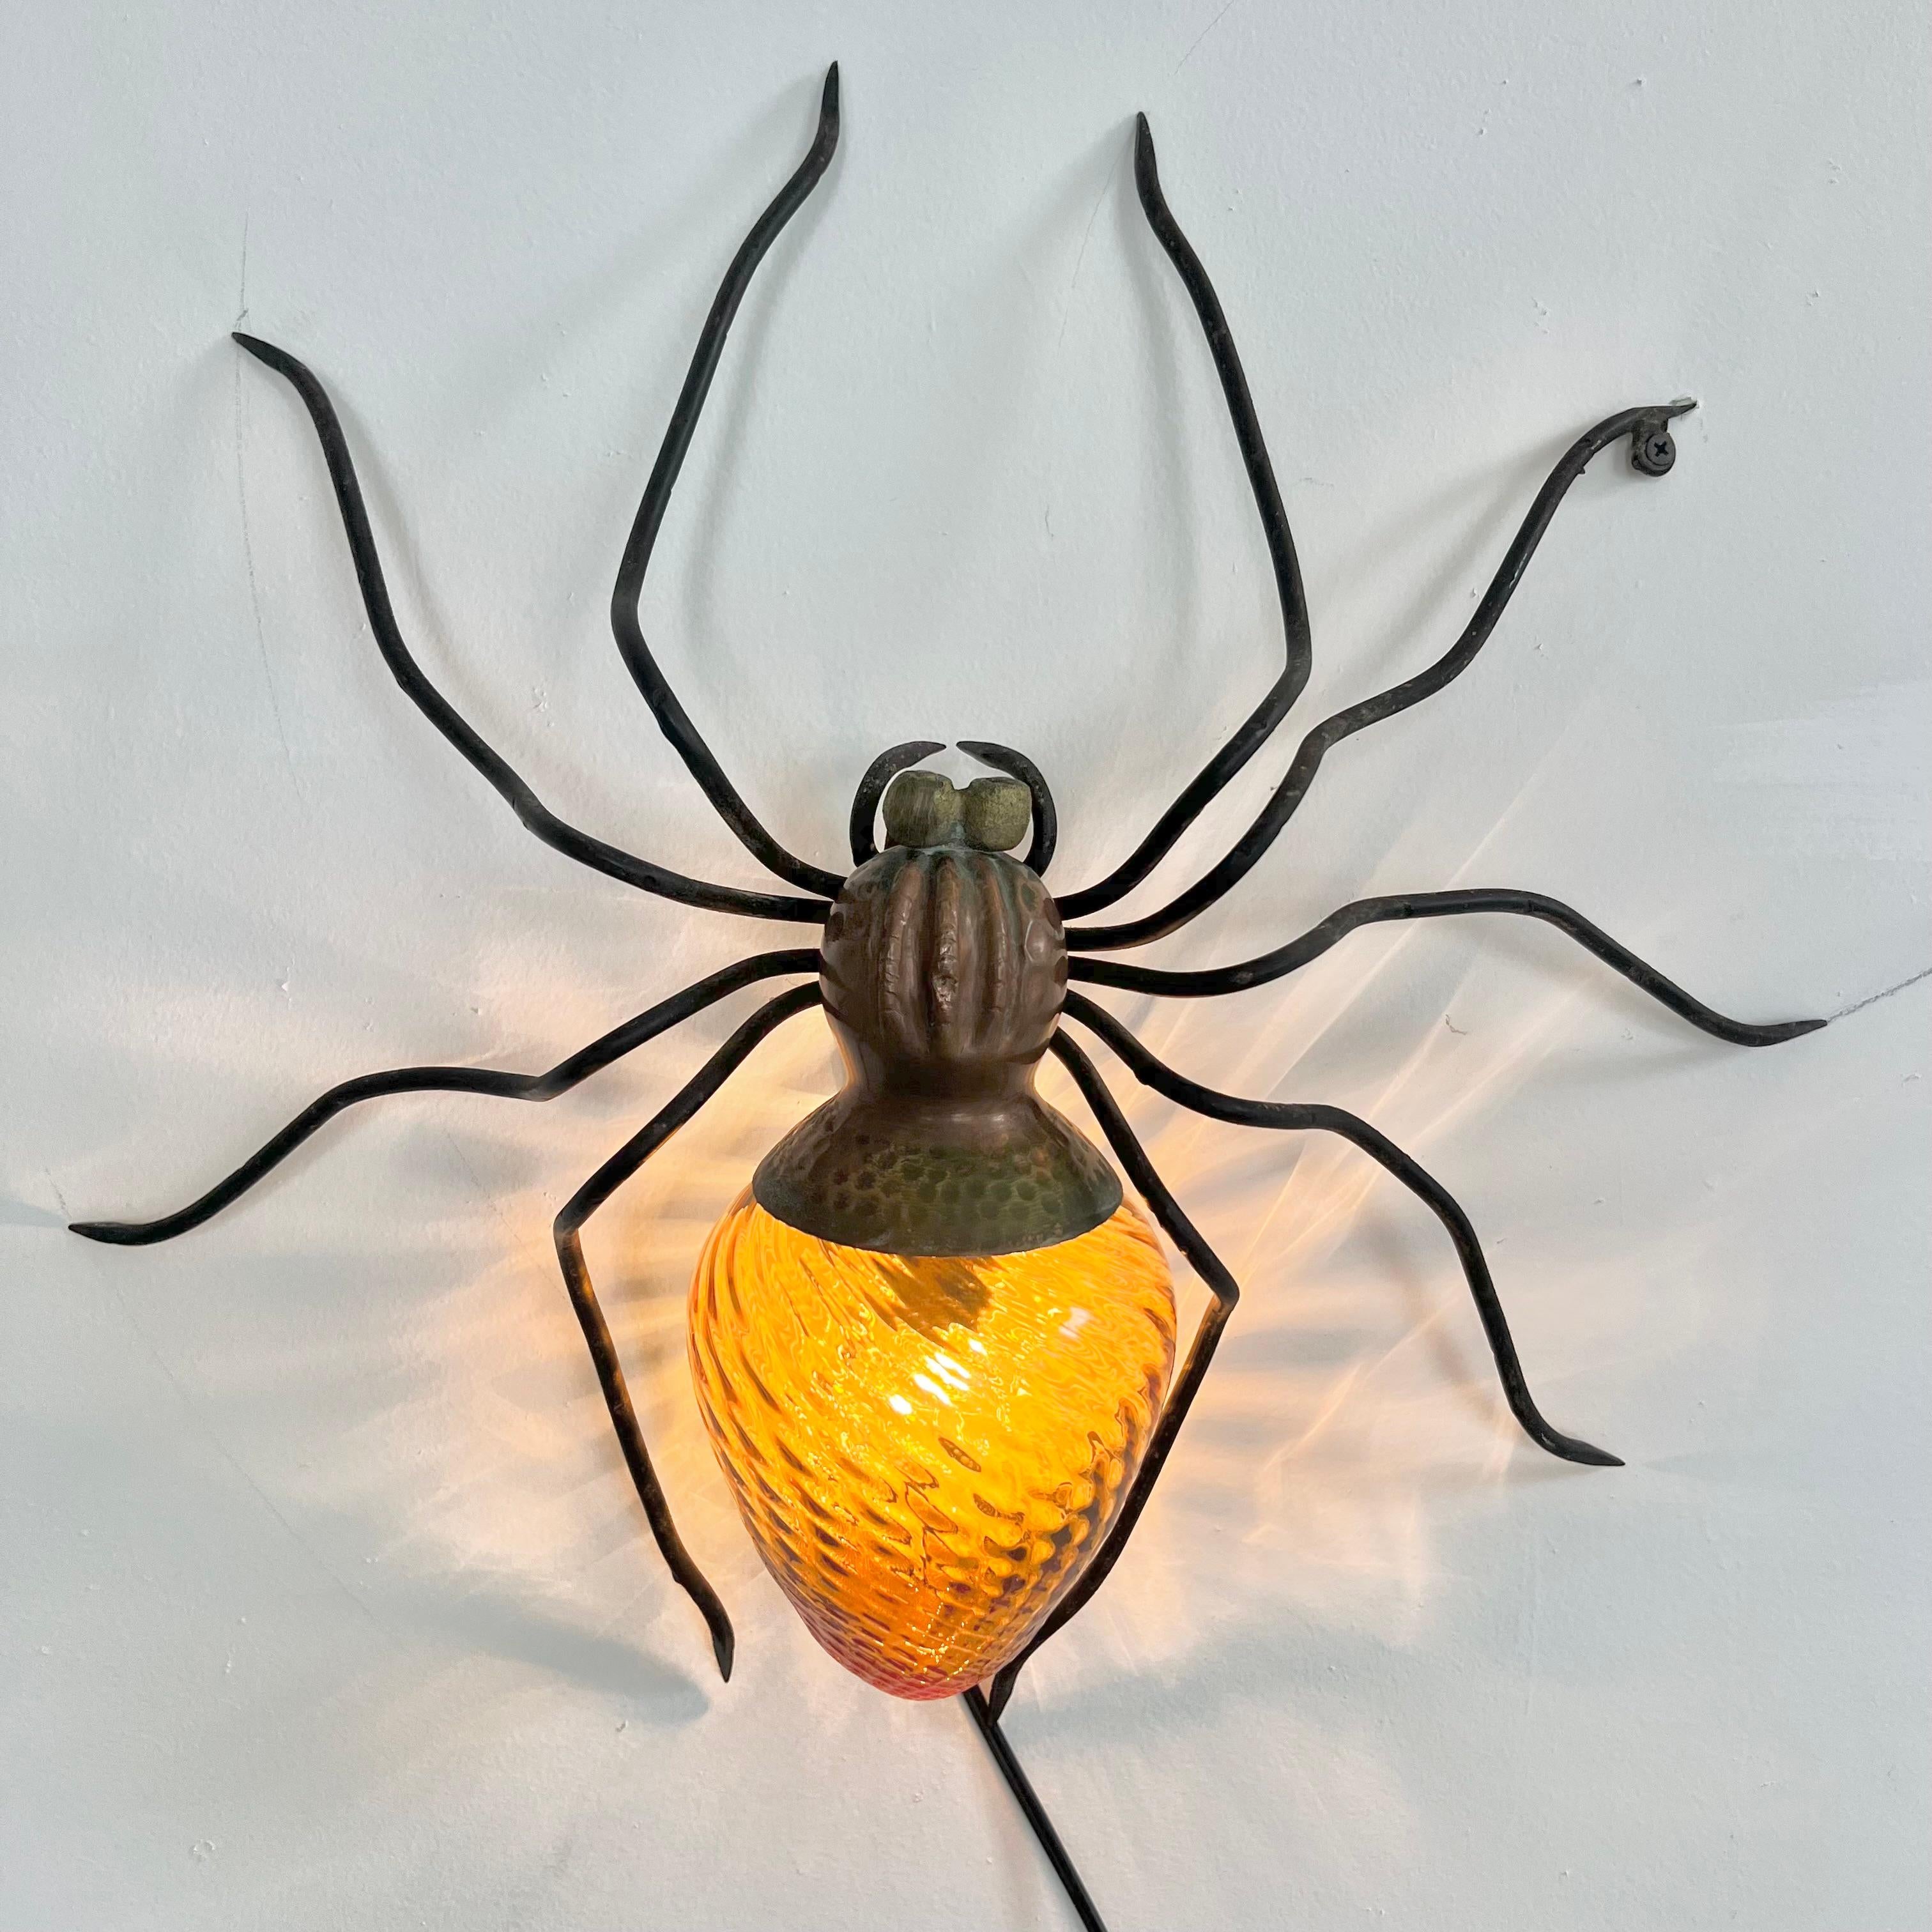 Unique copper and metal spider sconce handmade in Italy. Great presence and detail. Hammered copper body with black head and slender long legs. The abdomen is a beautiful amber glass globe with a spiral design. Eye catching lines and coloring. Good